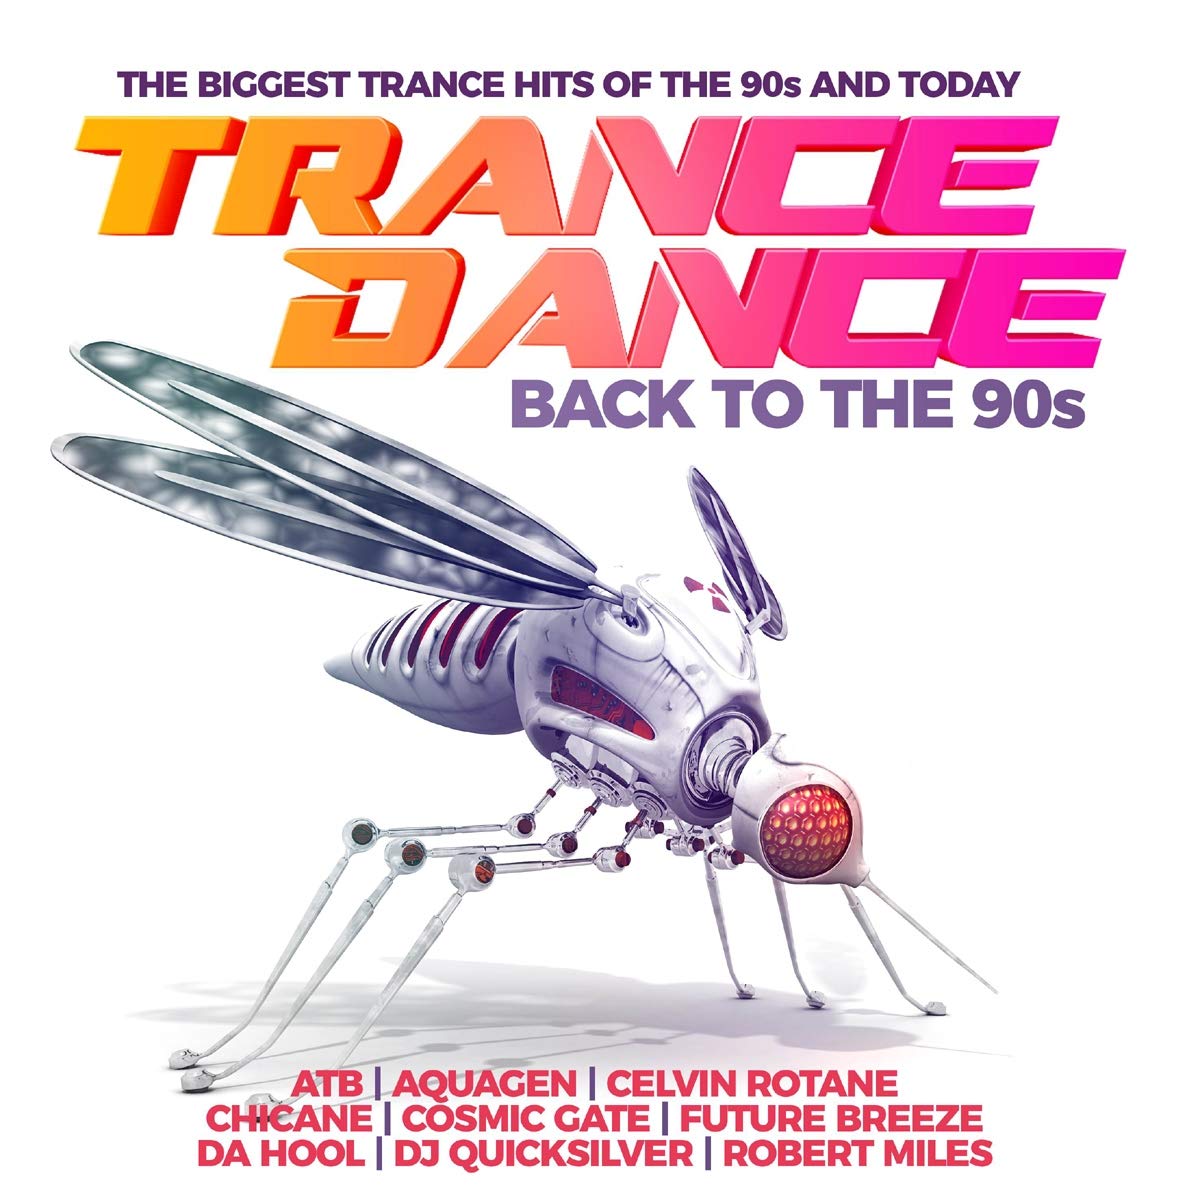 Trance Dance Back to the 90s (2019)